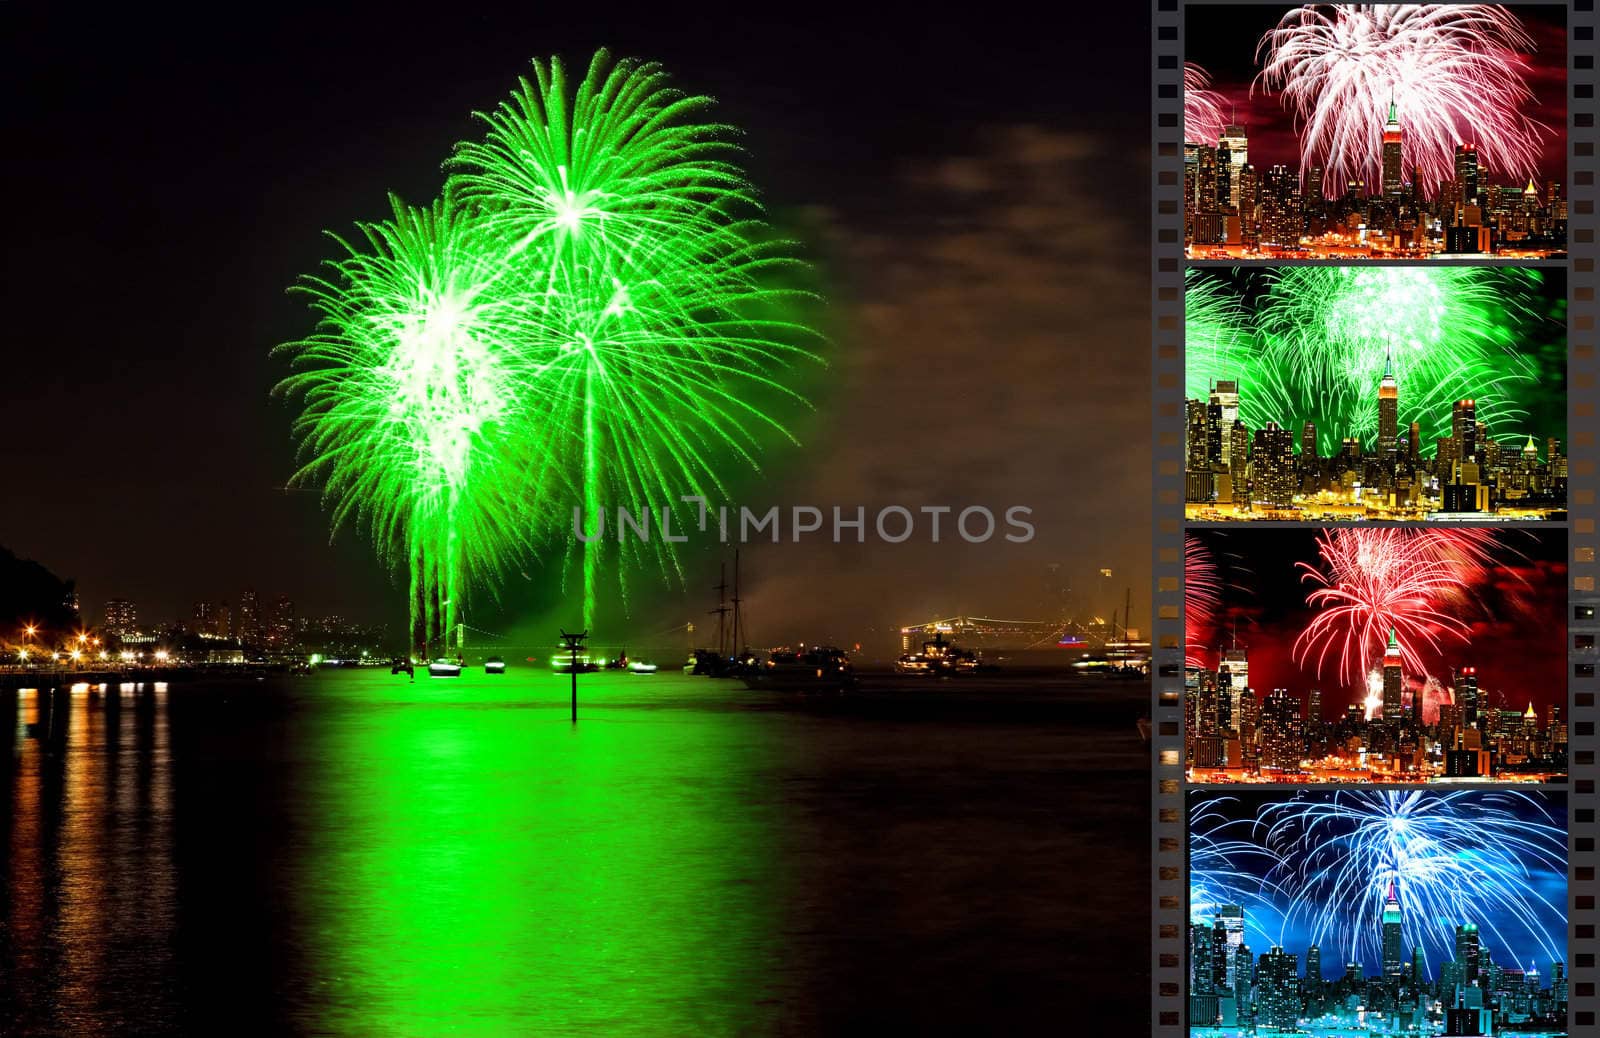  the Macy's 4th of July fireworks displays by gary718